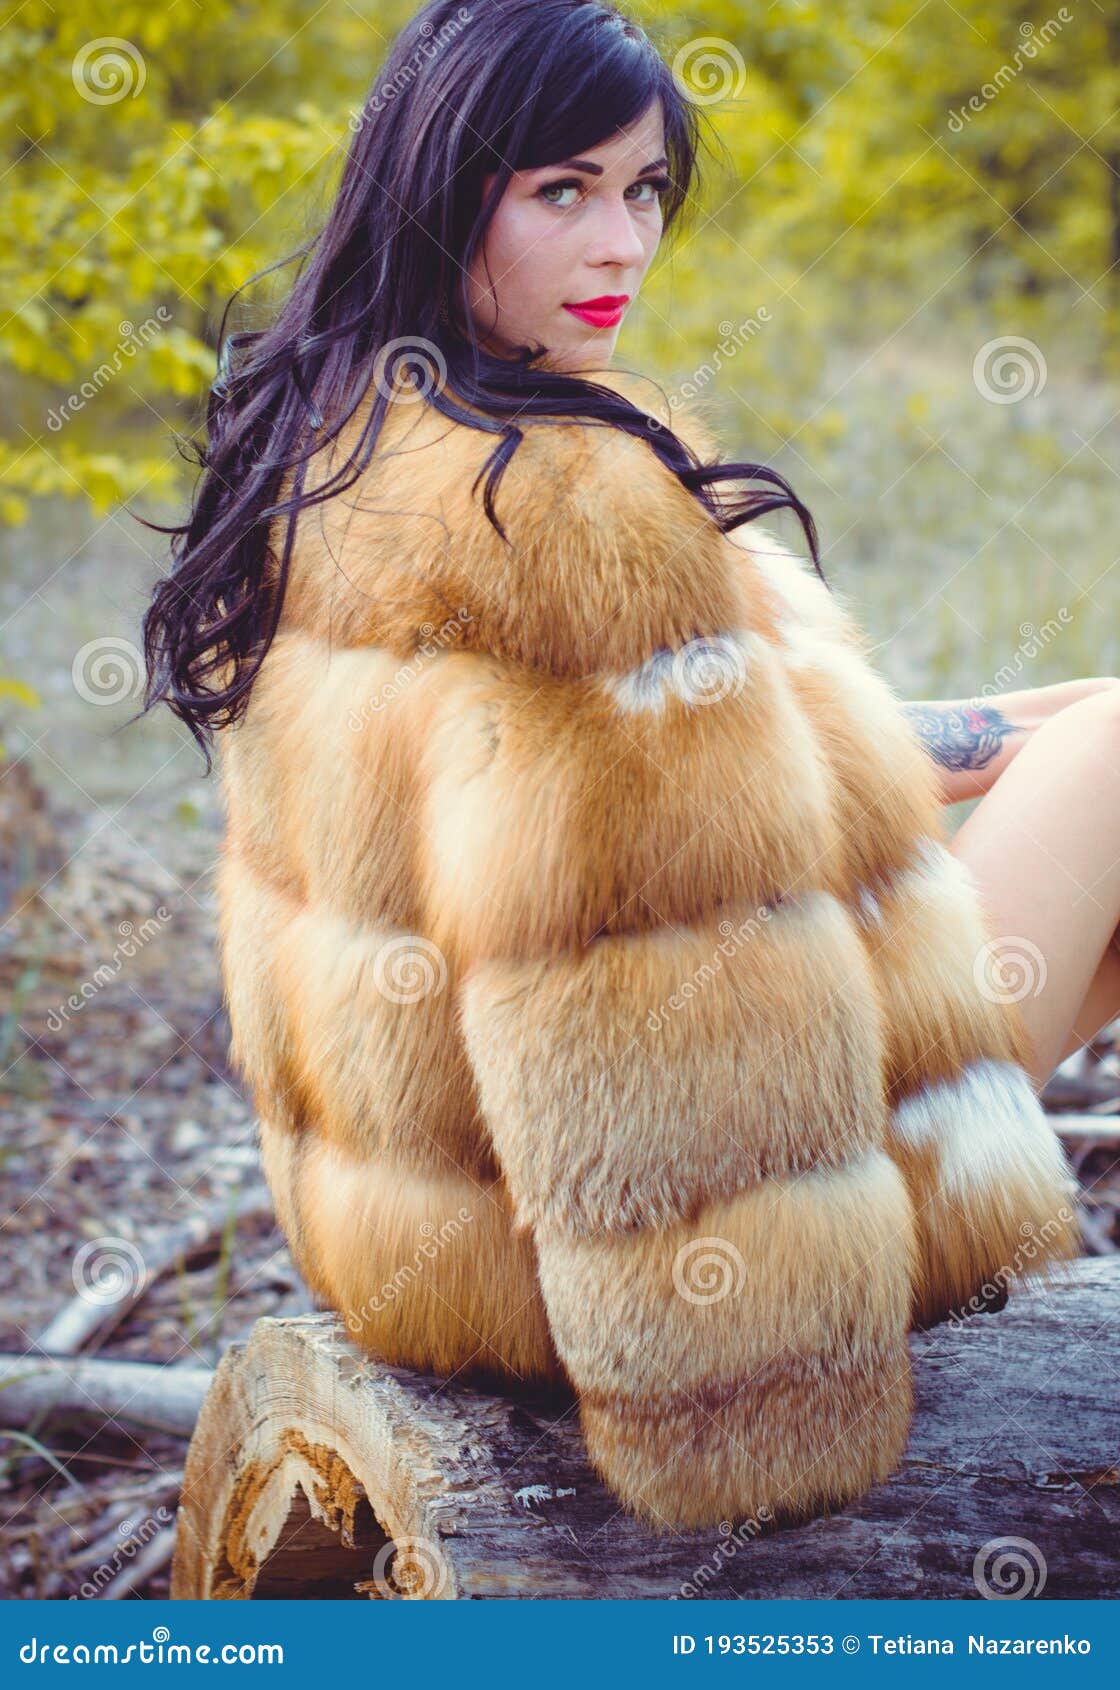 candy newton share naked under fur coat photos